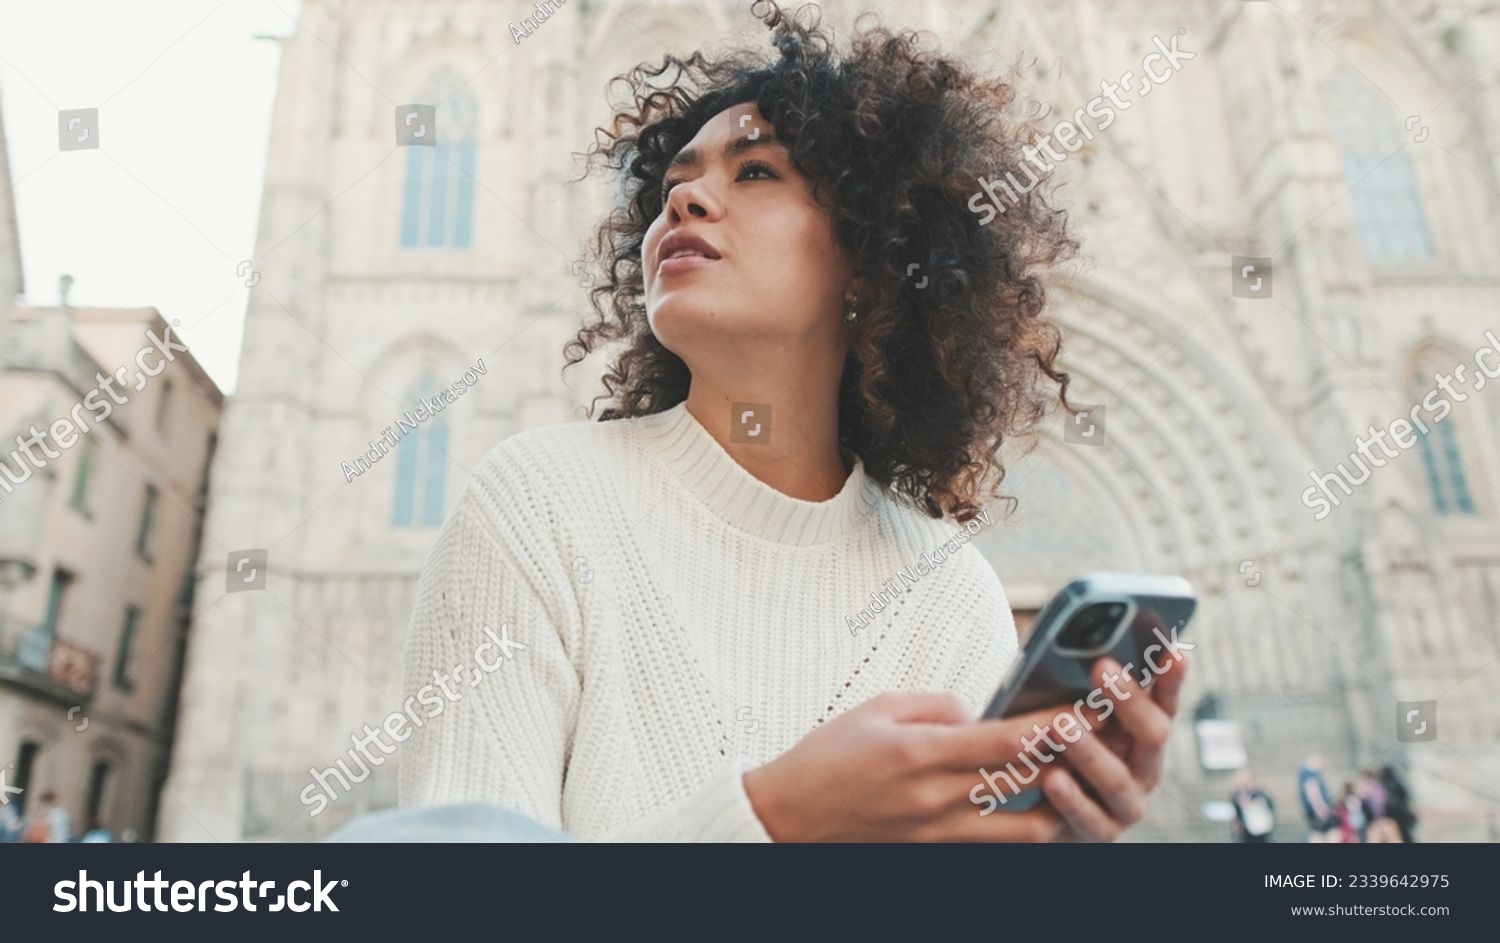 Young woman looks around. Happy girl uses mobile phone on old city background #2339642975